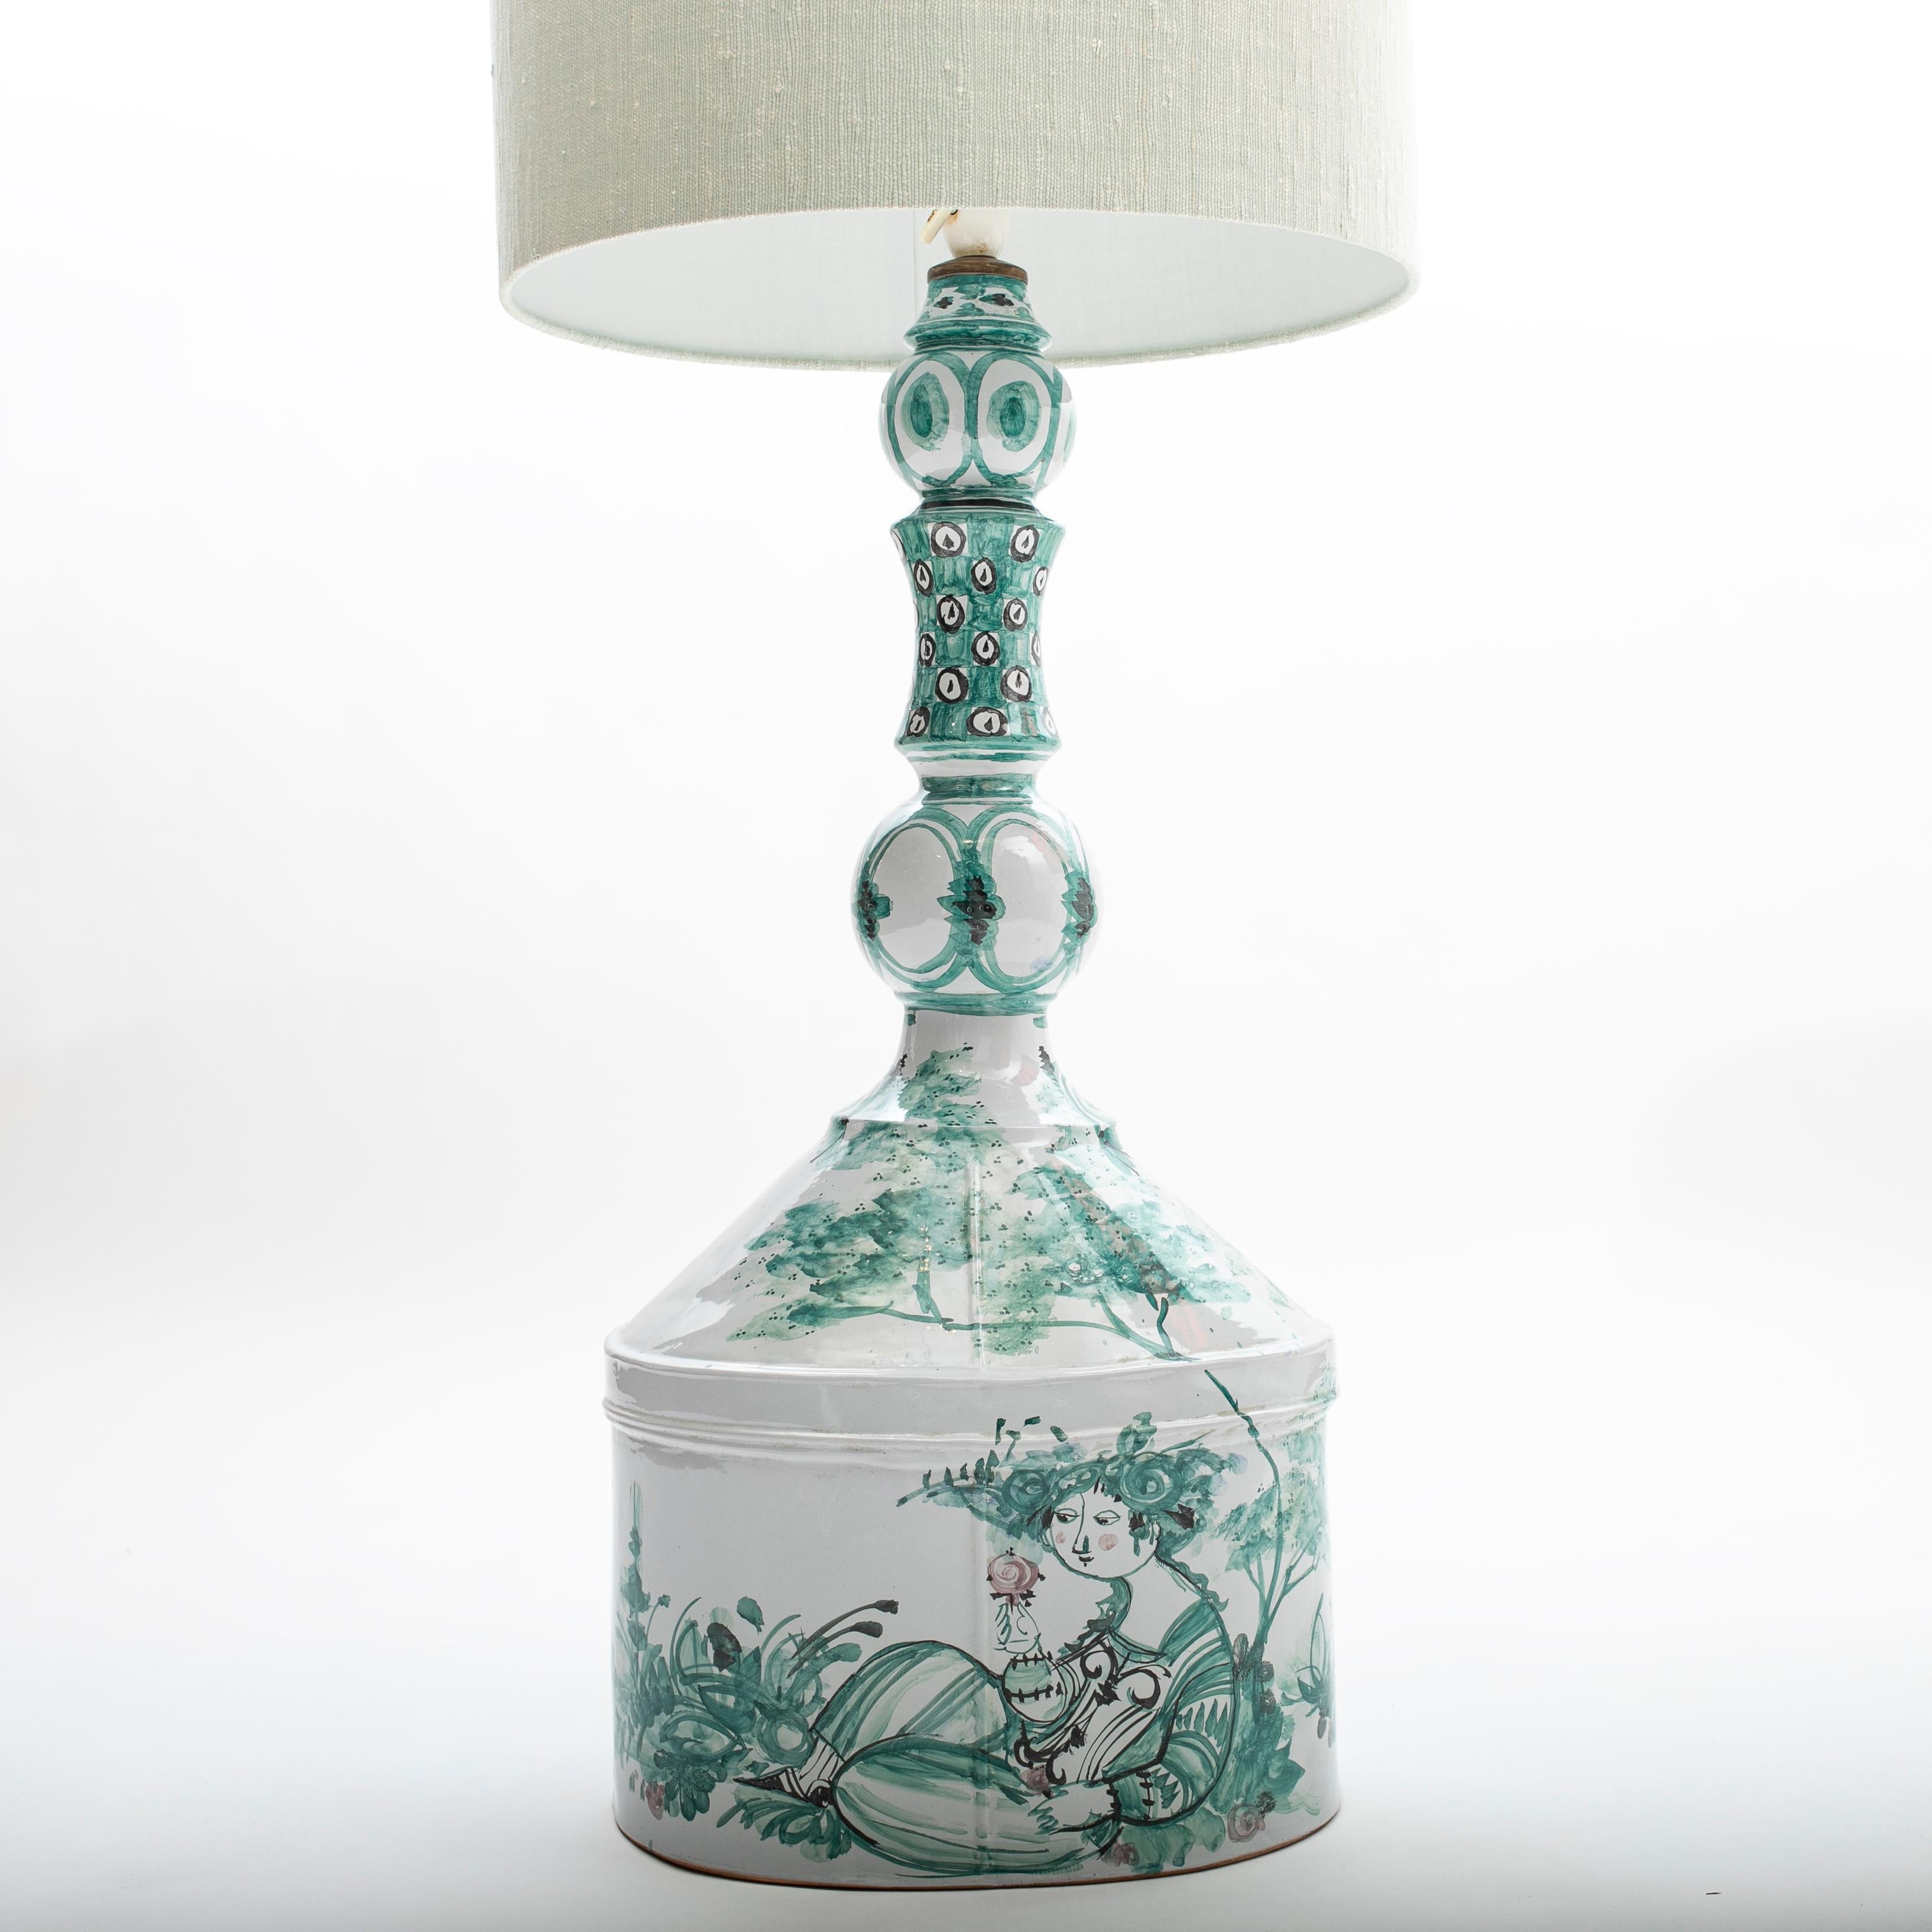 Bjørn Wiinblad 1918-2006
A large floor or table lamp in white-glazed ceramics. ( one of a kind )
Hand decorated with a young woman in nature and floral ornamentation in green, pink and black colors.

Signed and dated Bjørn Wiinblad '72.